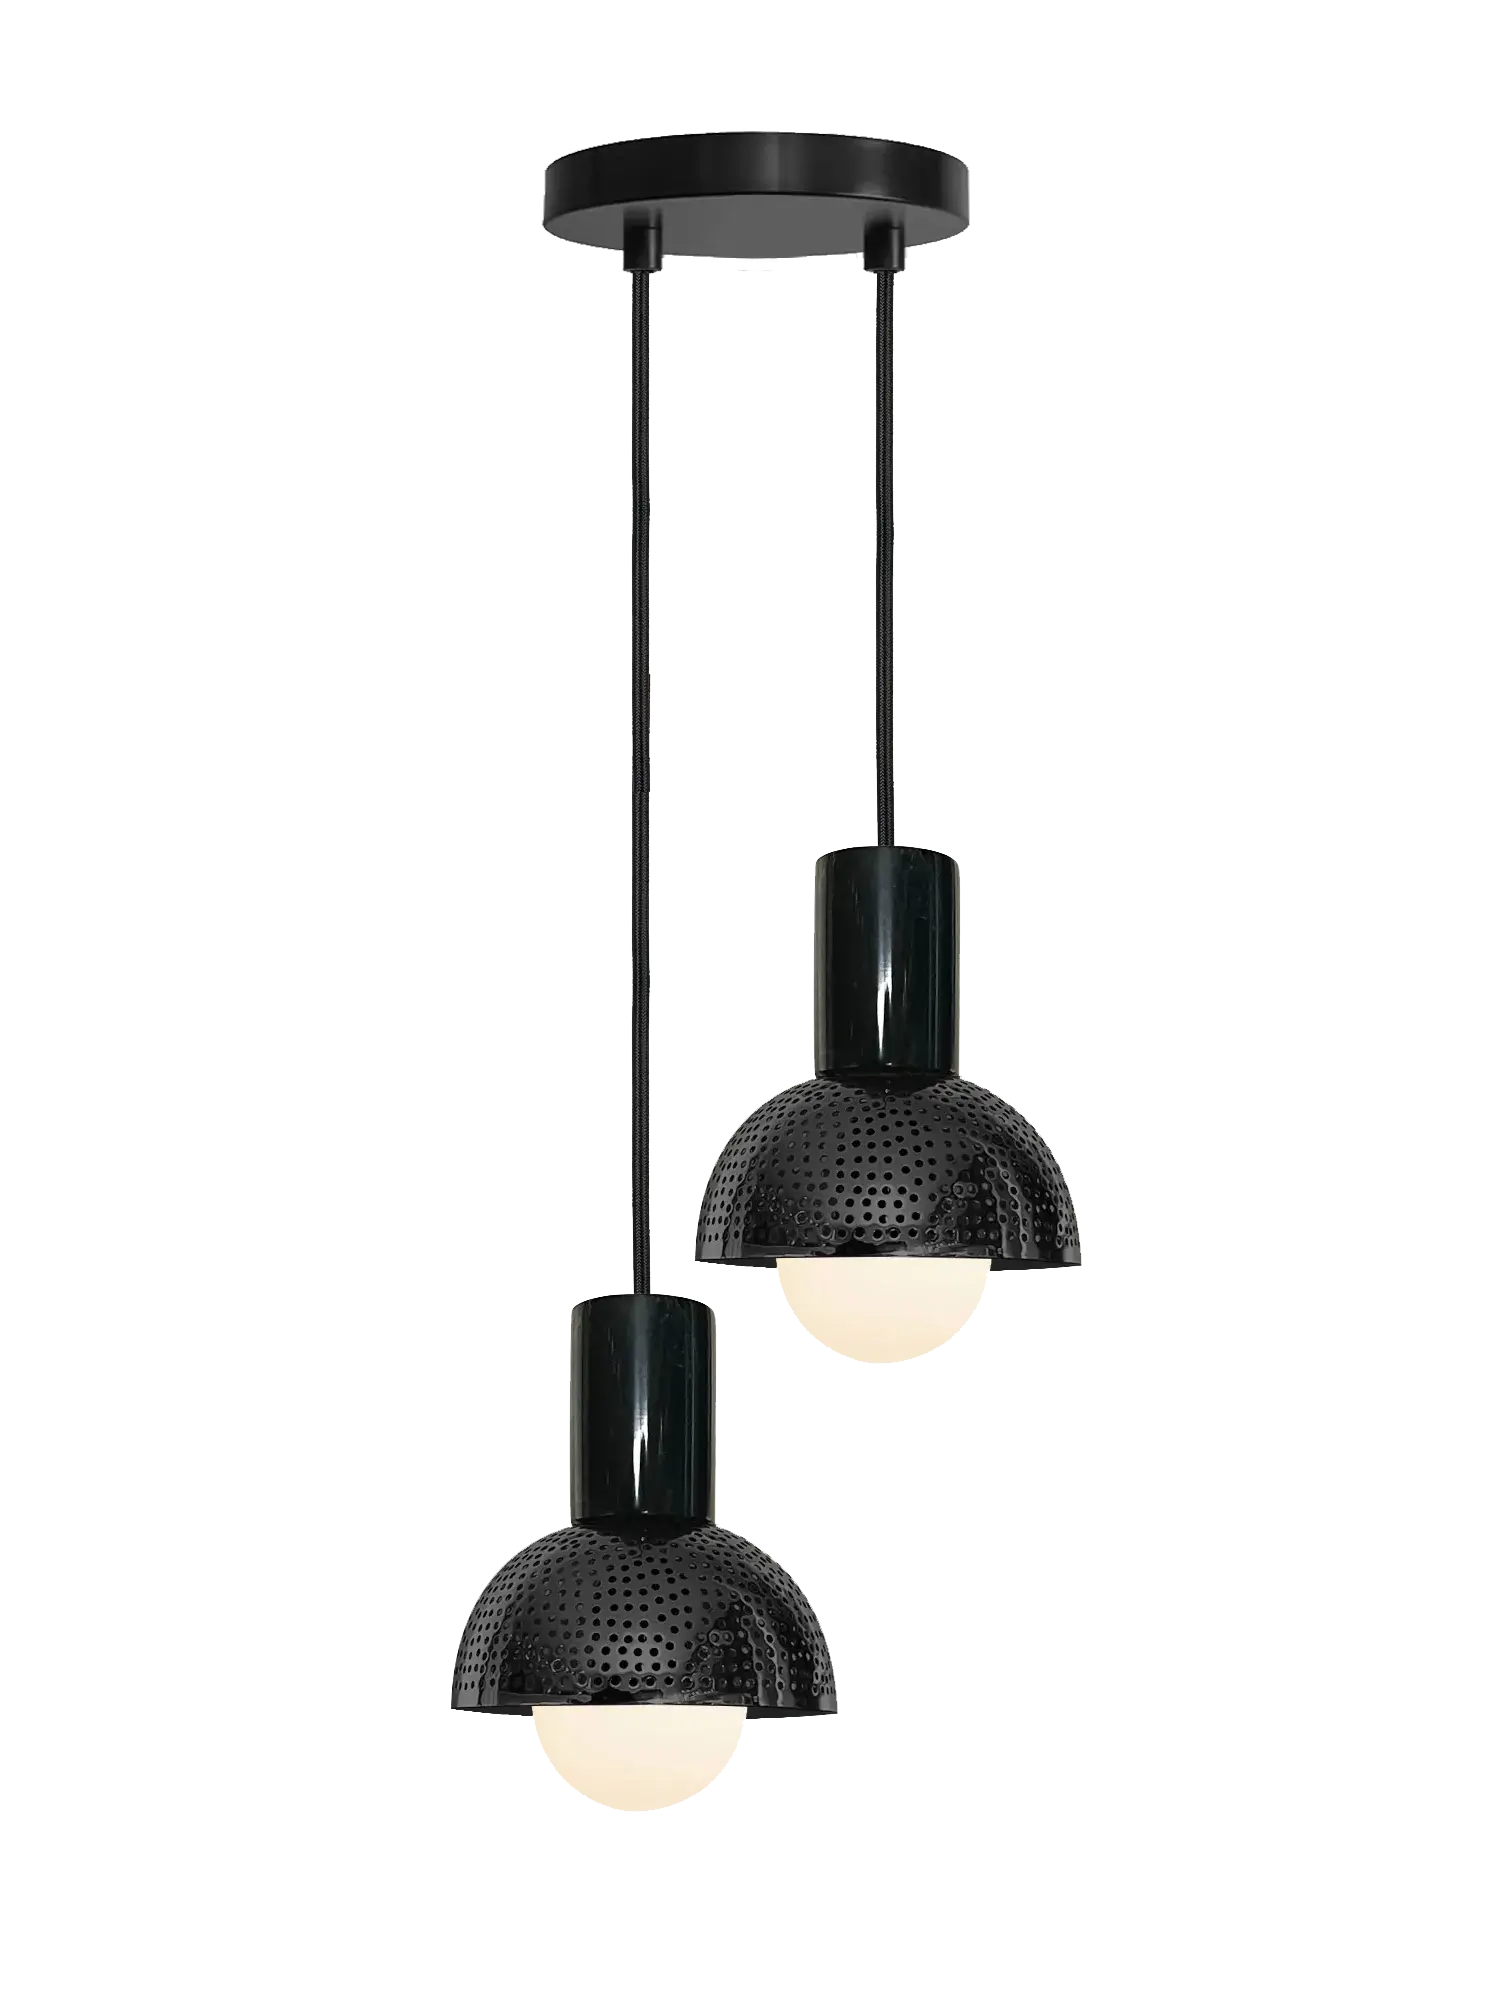 Dounia home chandeliers in black made of Metal, Model: Maria 2